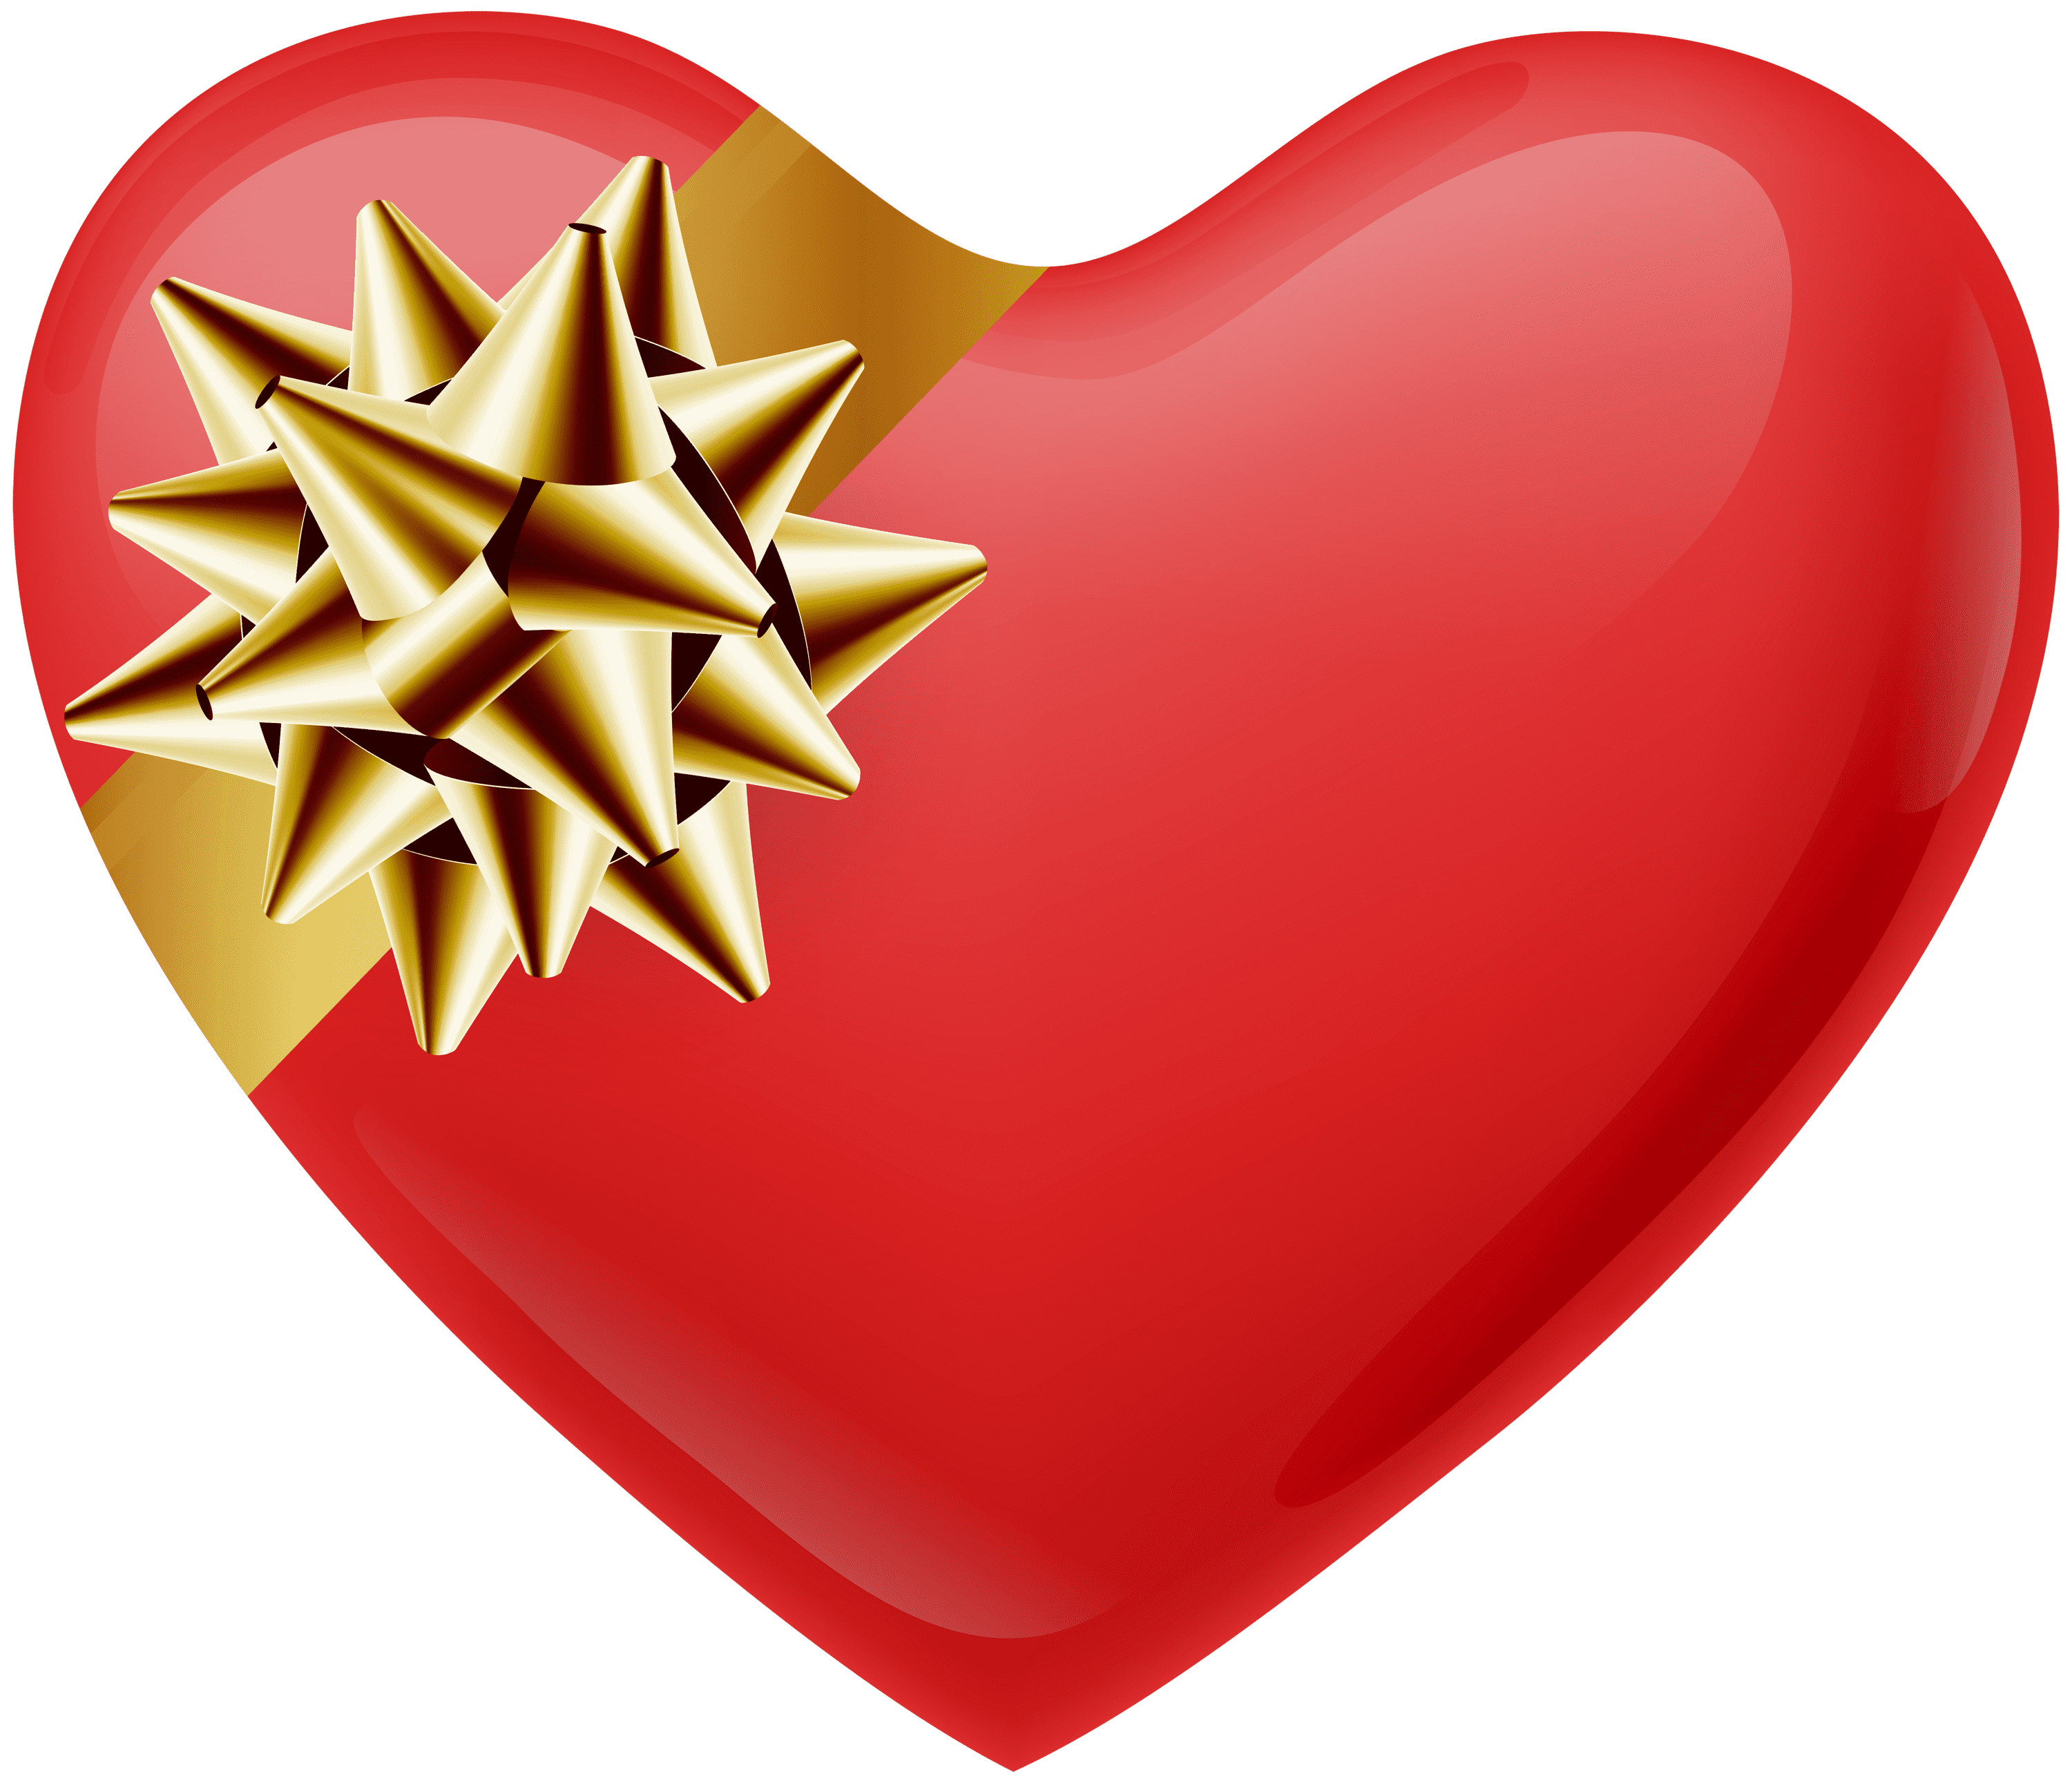 Heart with Gold Bow Transparent PNG Image